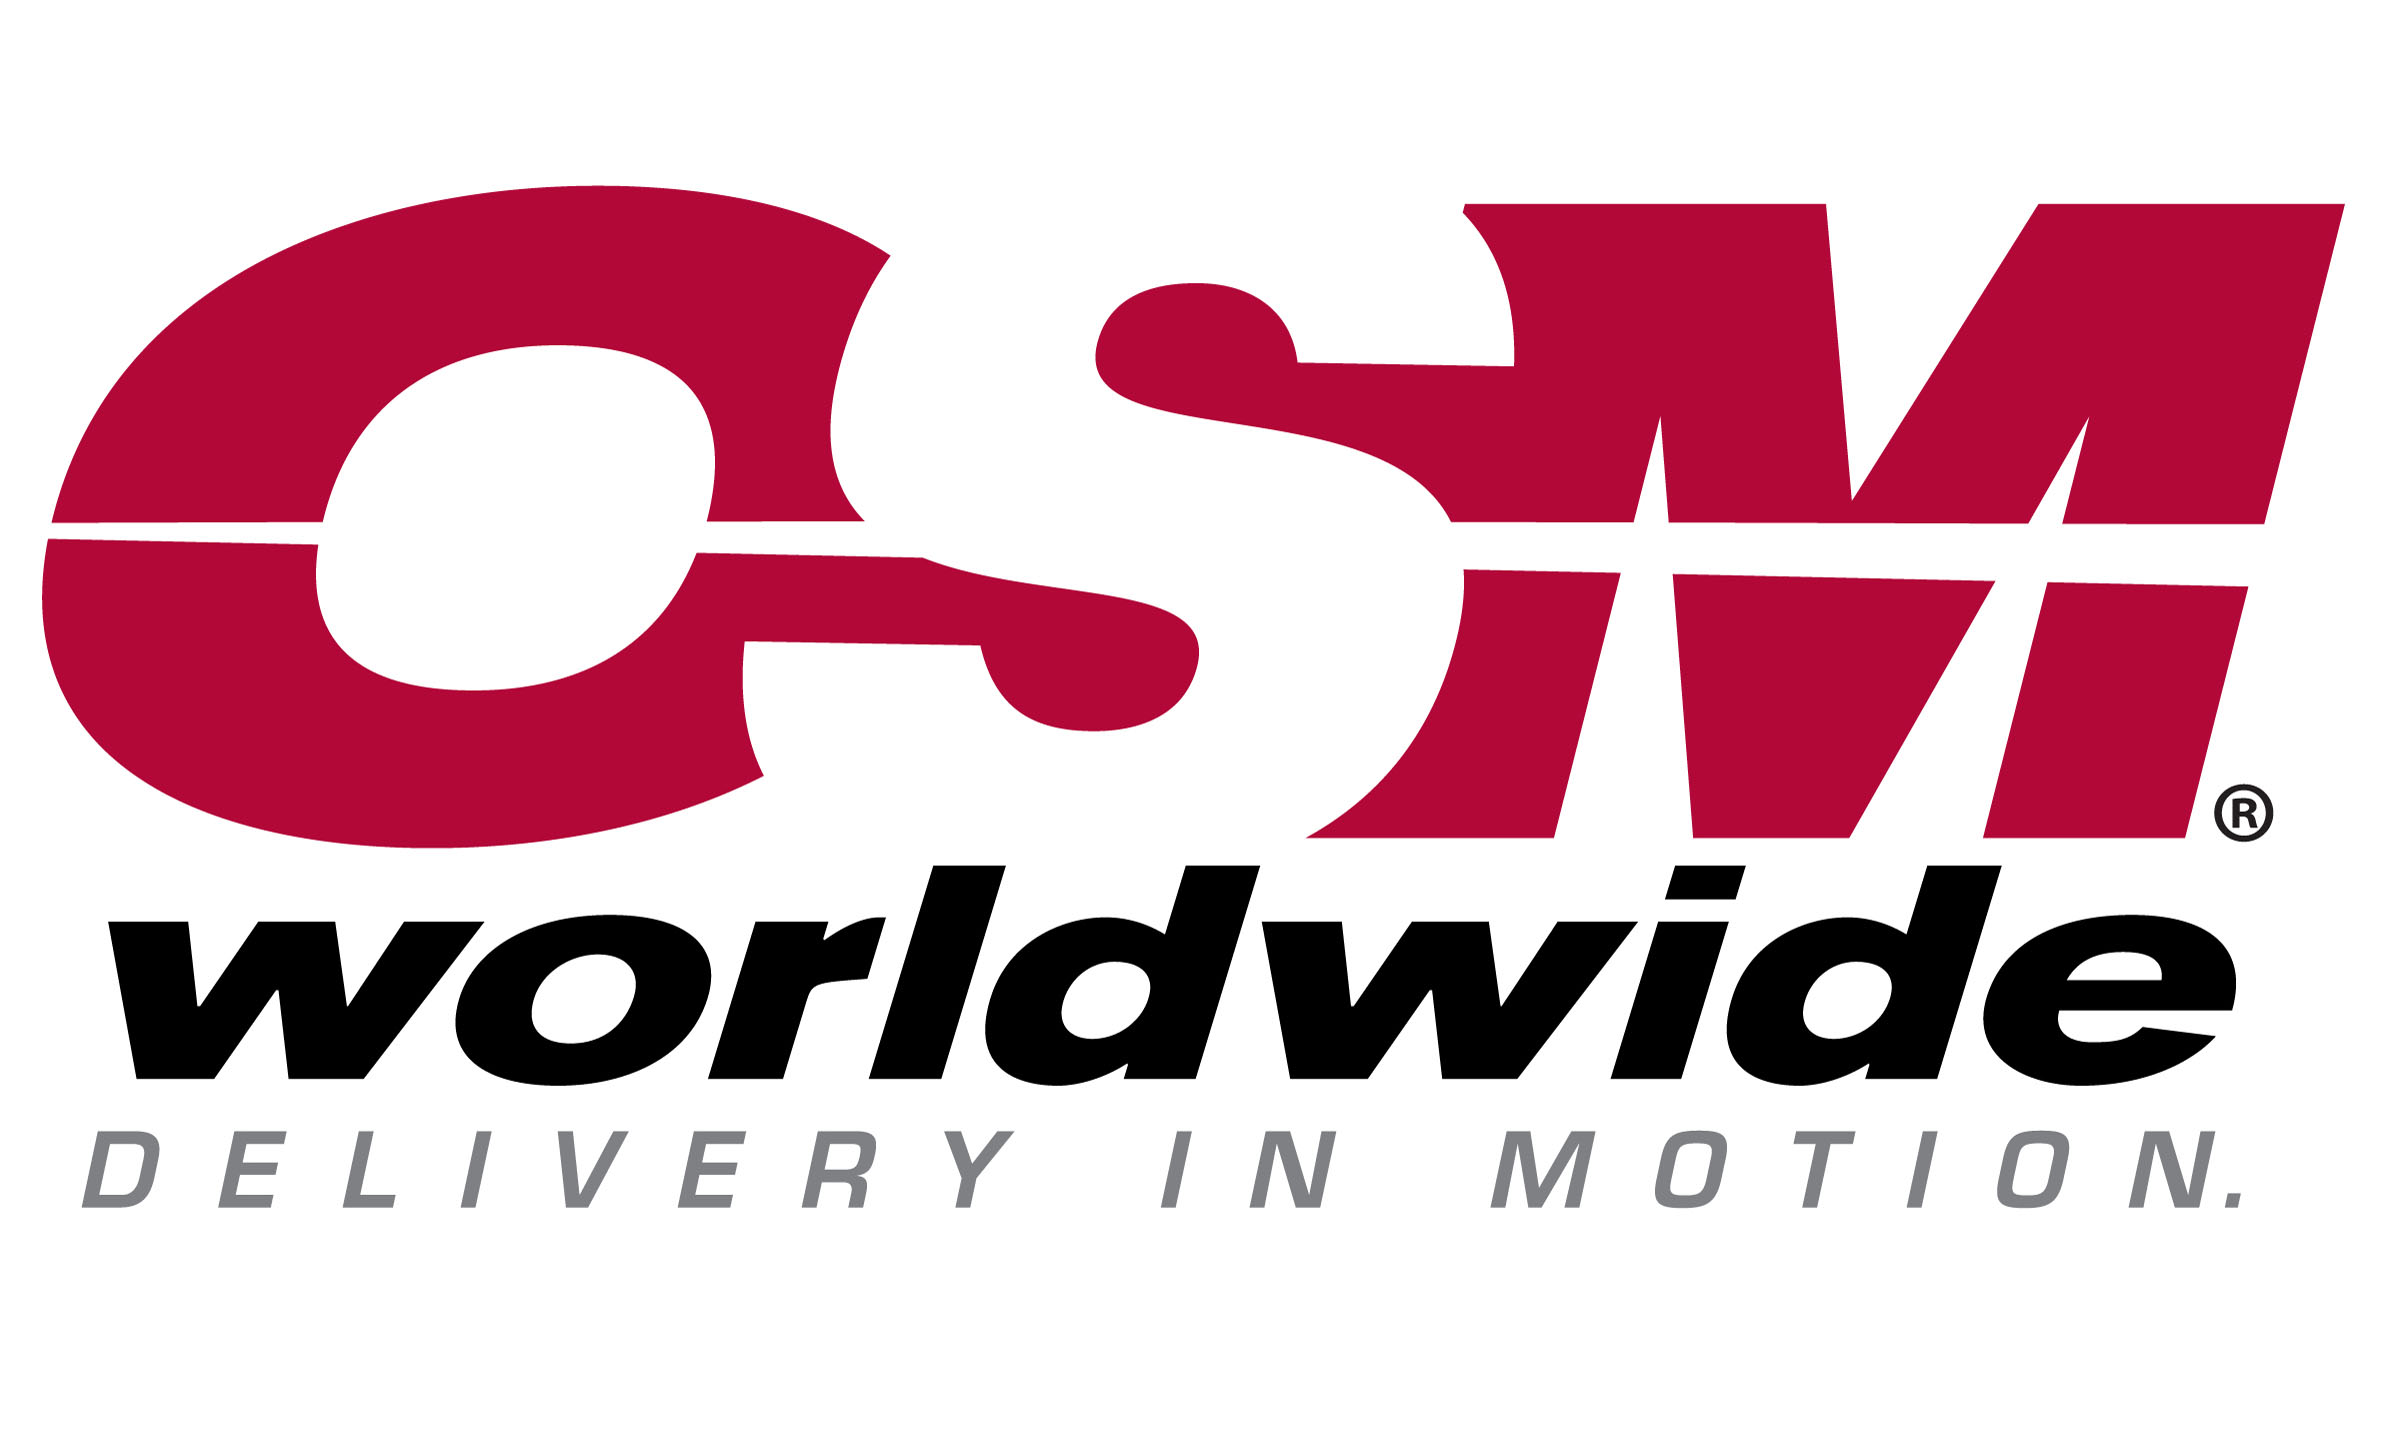 Call OSM Worldwide today at 866.681.7867 for a free shipping analysis.